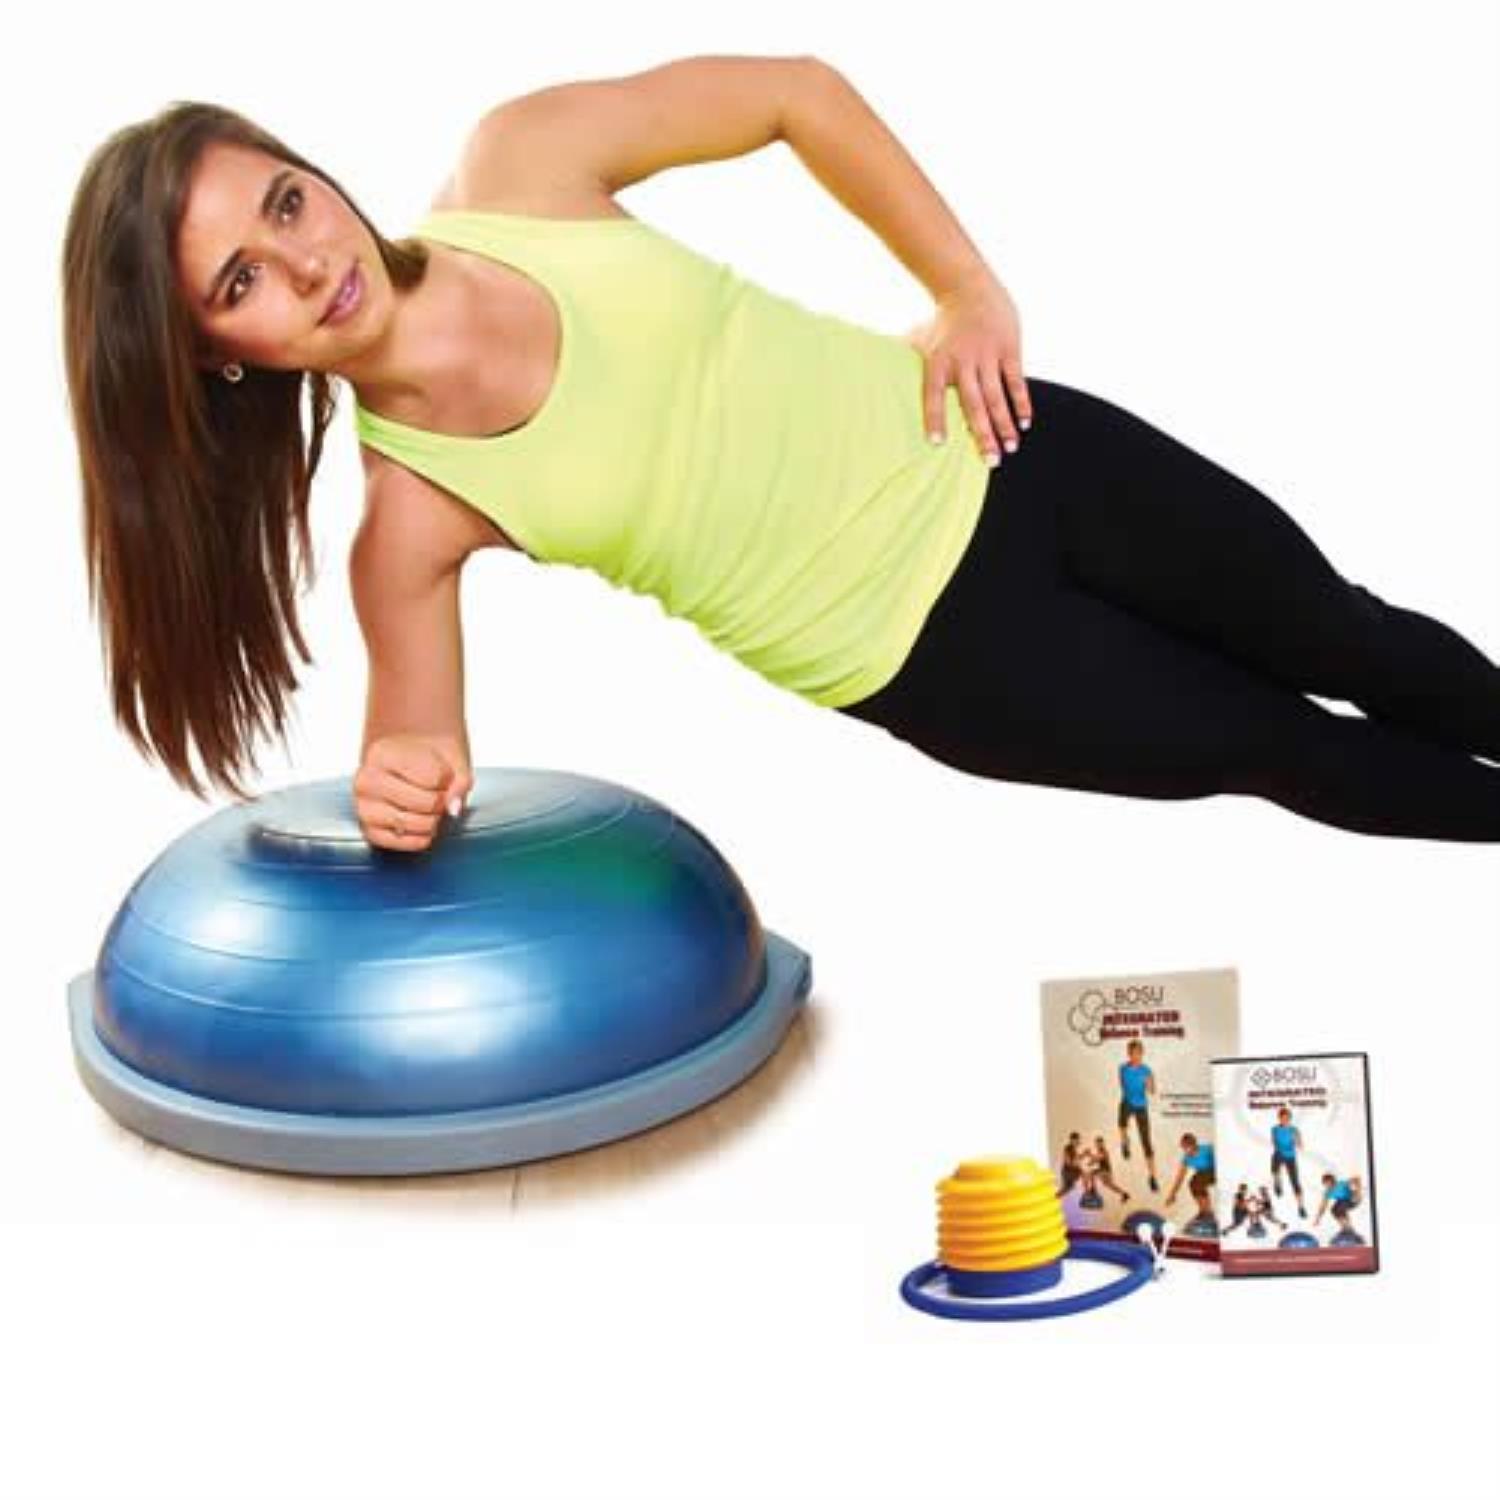 BOSU Balance Trainer Includes DVD and Manual - image 1 of 1